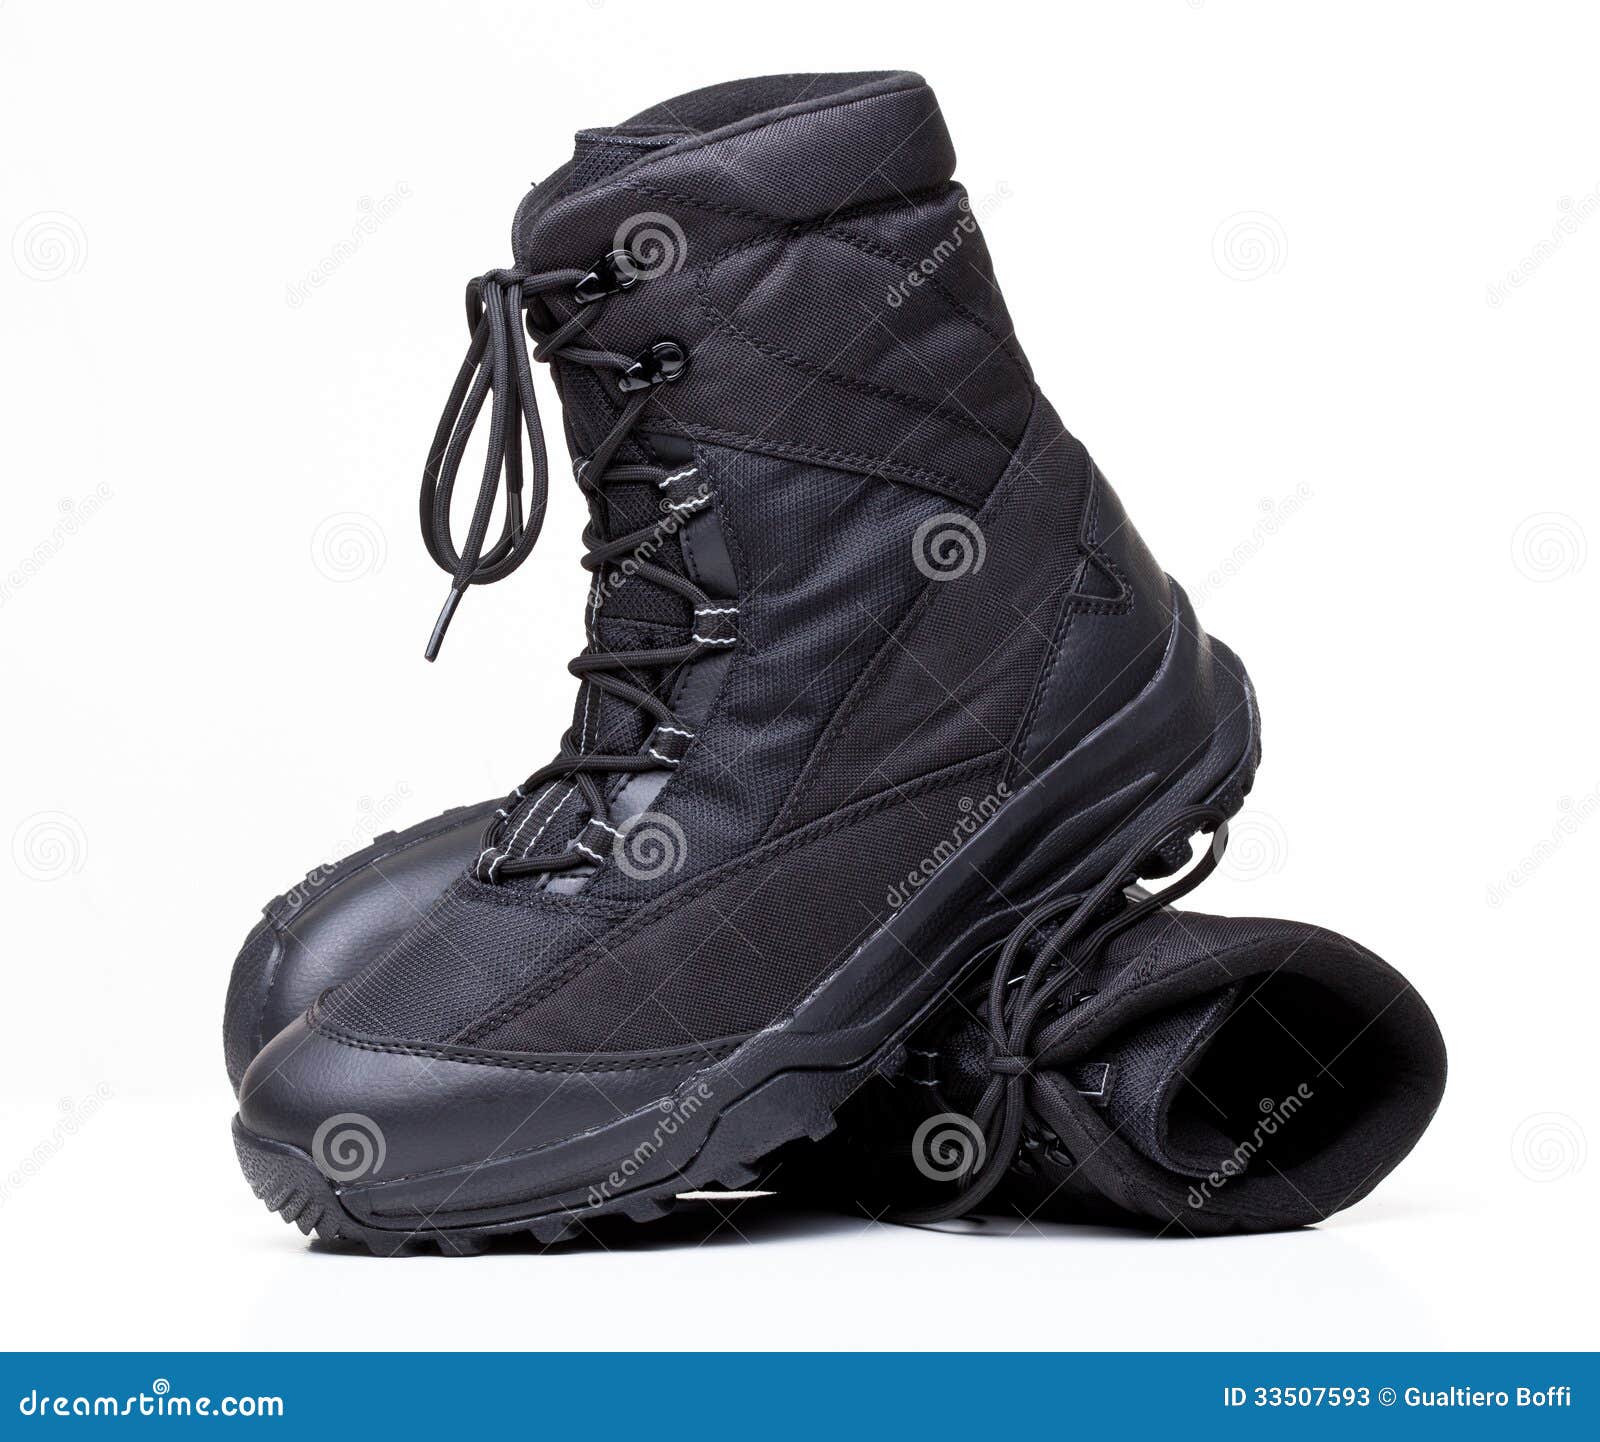 clipart winter boots - photo #42